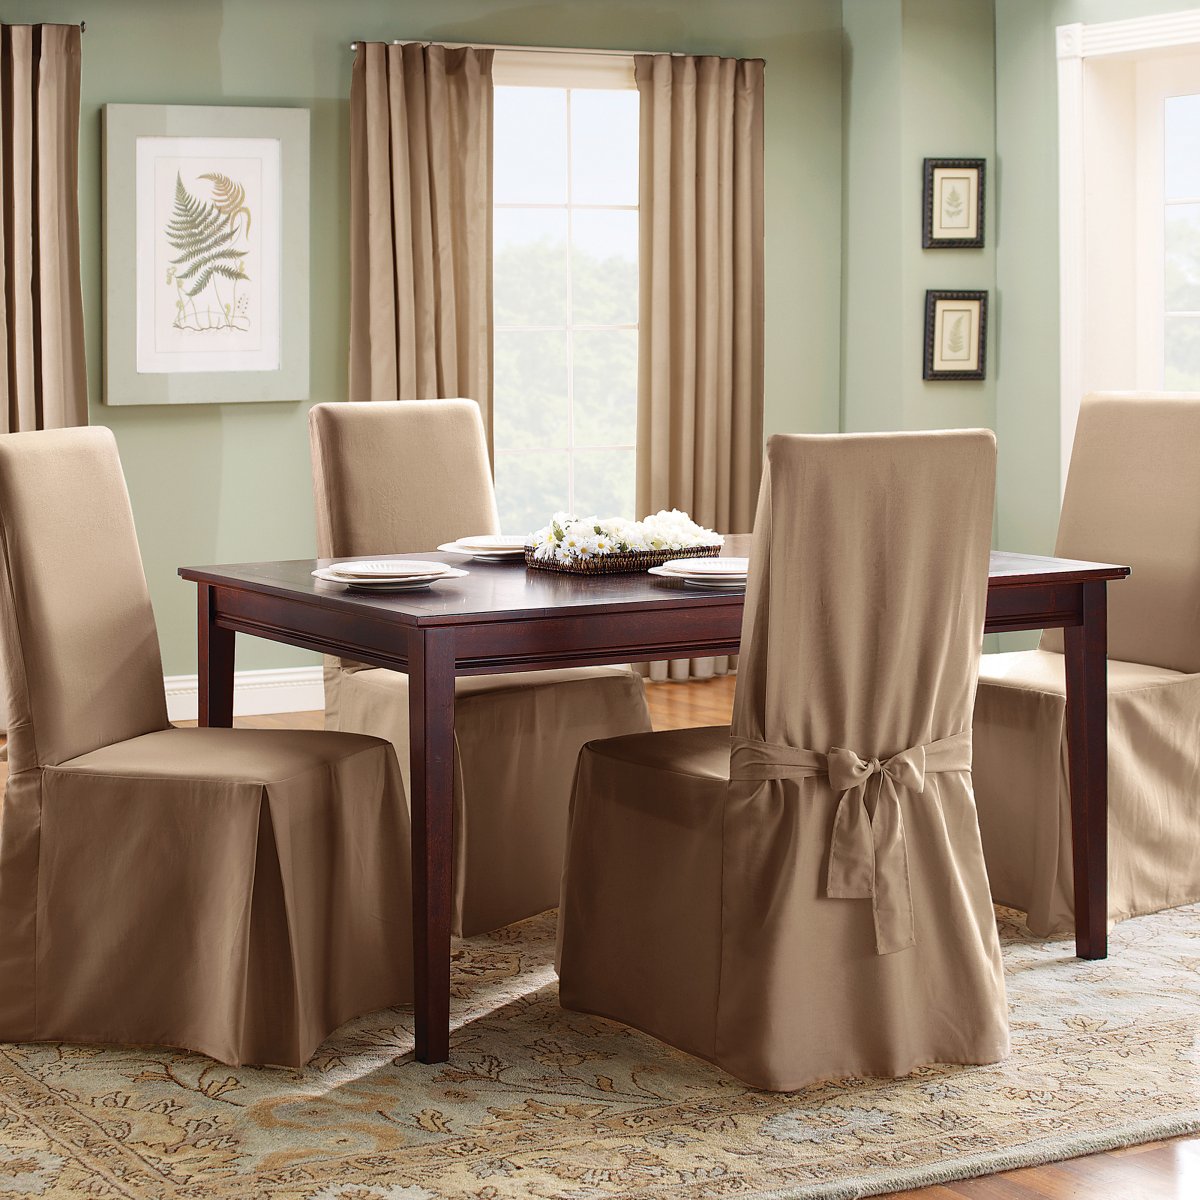 Throw covers for kitchen chairs